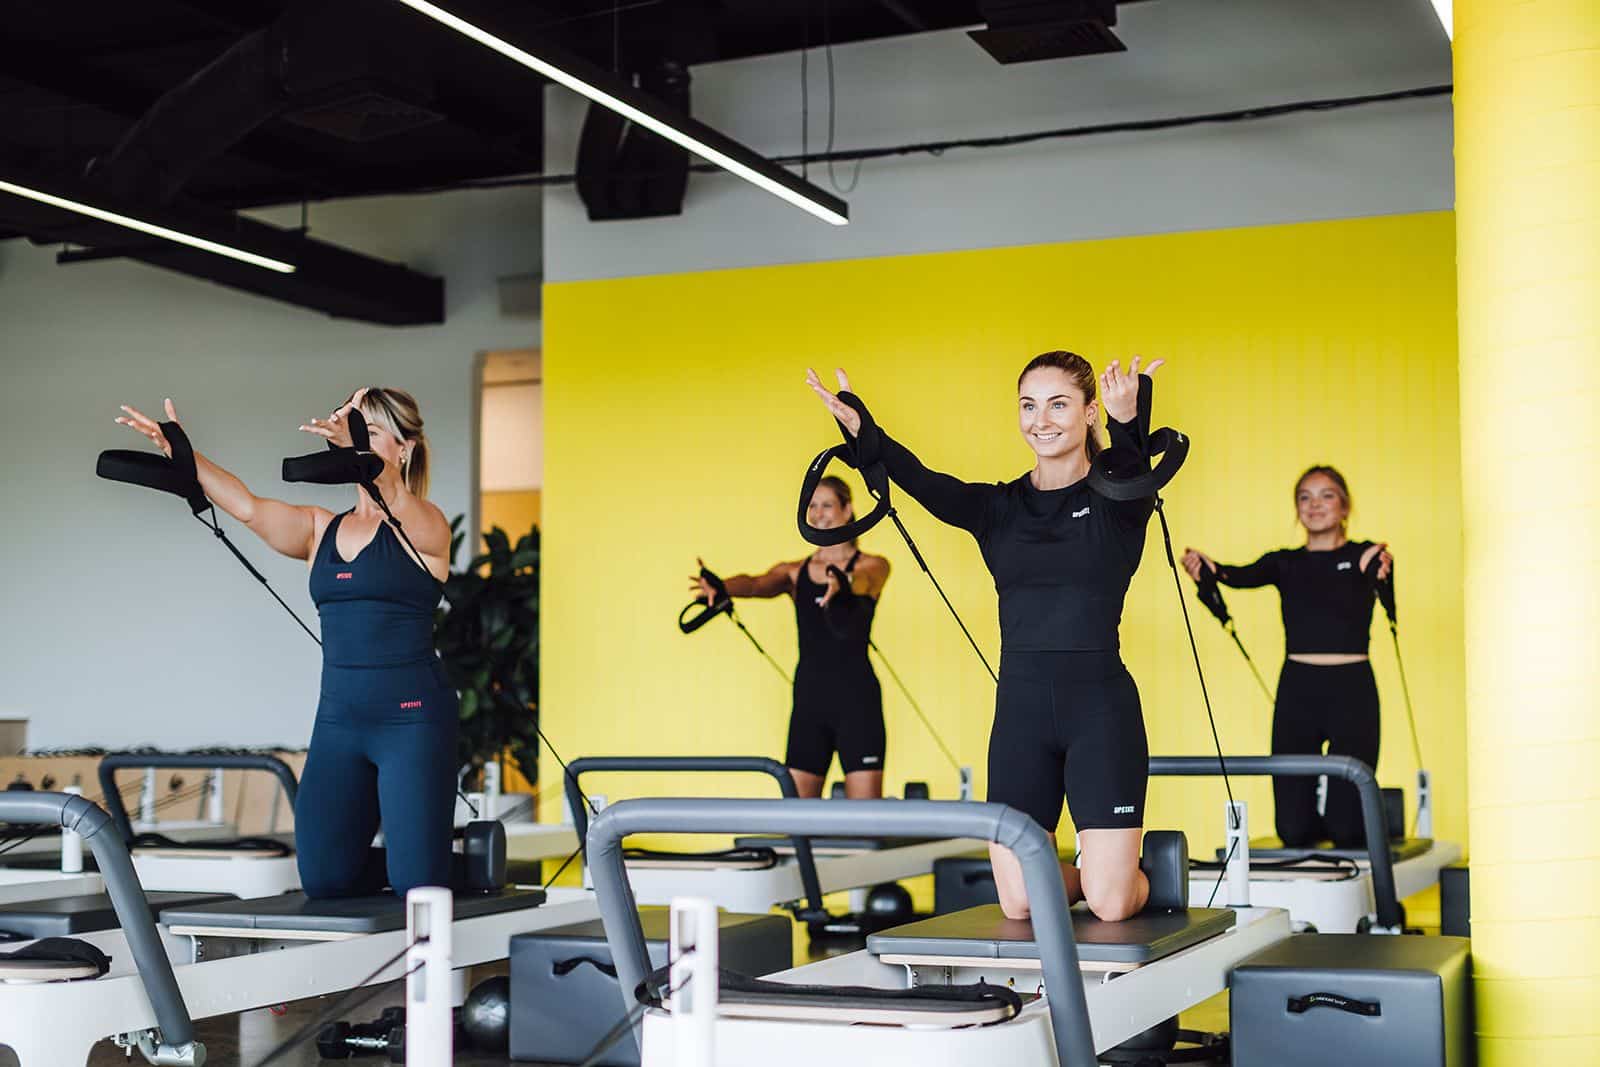 A group of women are happily sweating and getting stronger in a 45 minute reformer pilates class at Upstate. They raise their arms in straps on the reformer beds. Behind them is a bright yellow wall that radiates positive vibes.